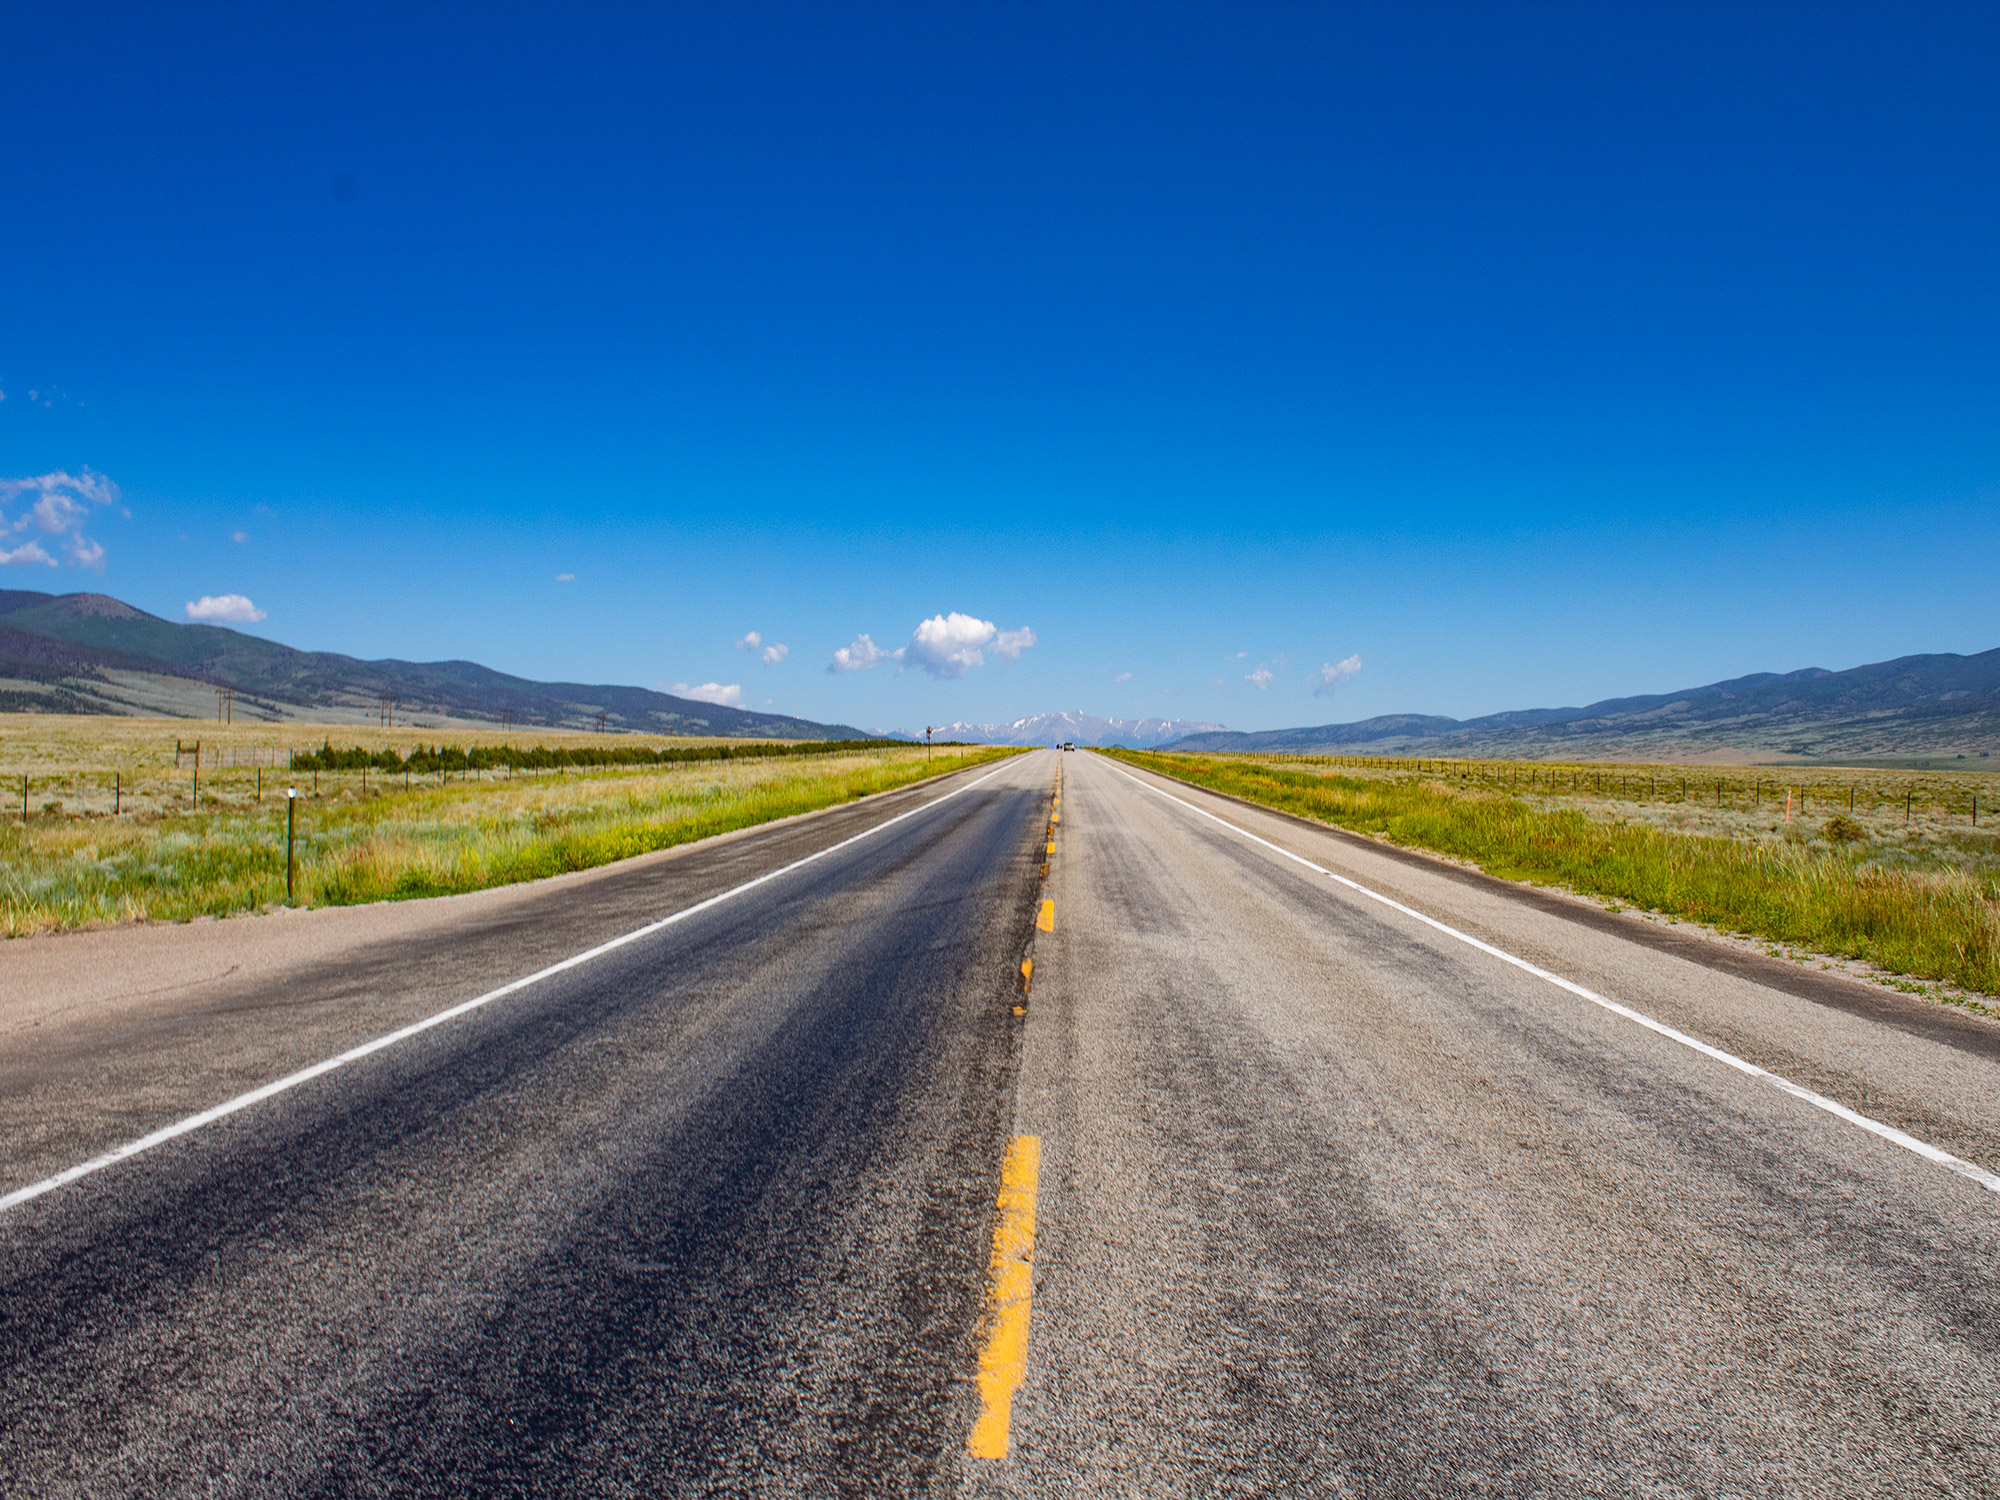 An inspiring view of an open, empty road that vanishes into the mountains in Colorado